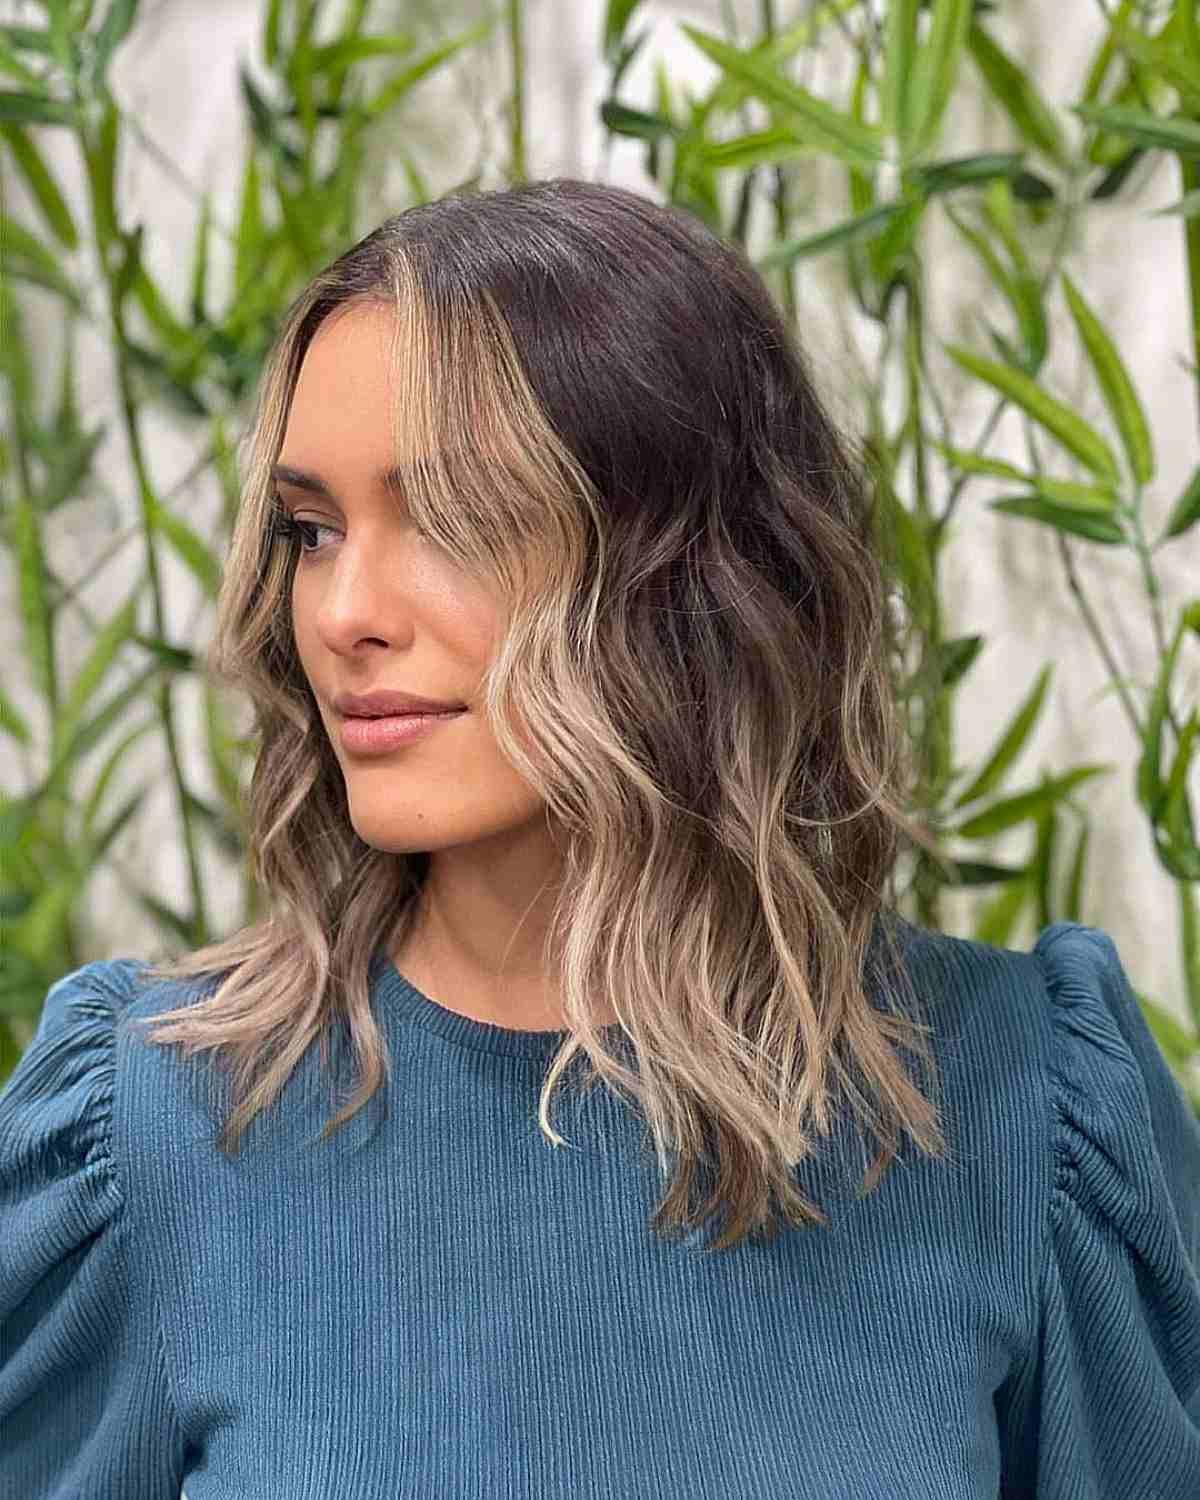 25 Captivating Hairstyles for Girls with Medium Hair